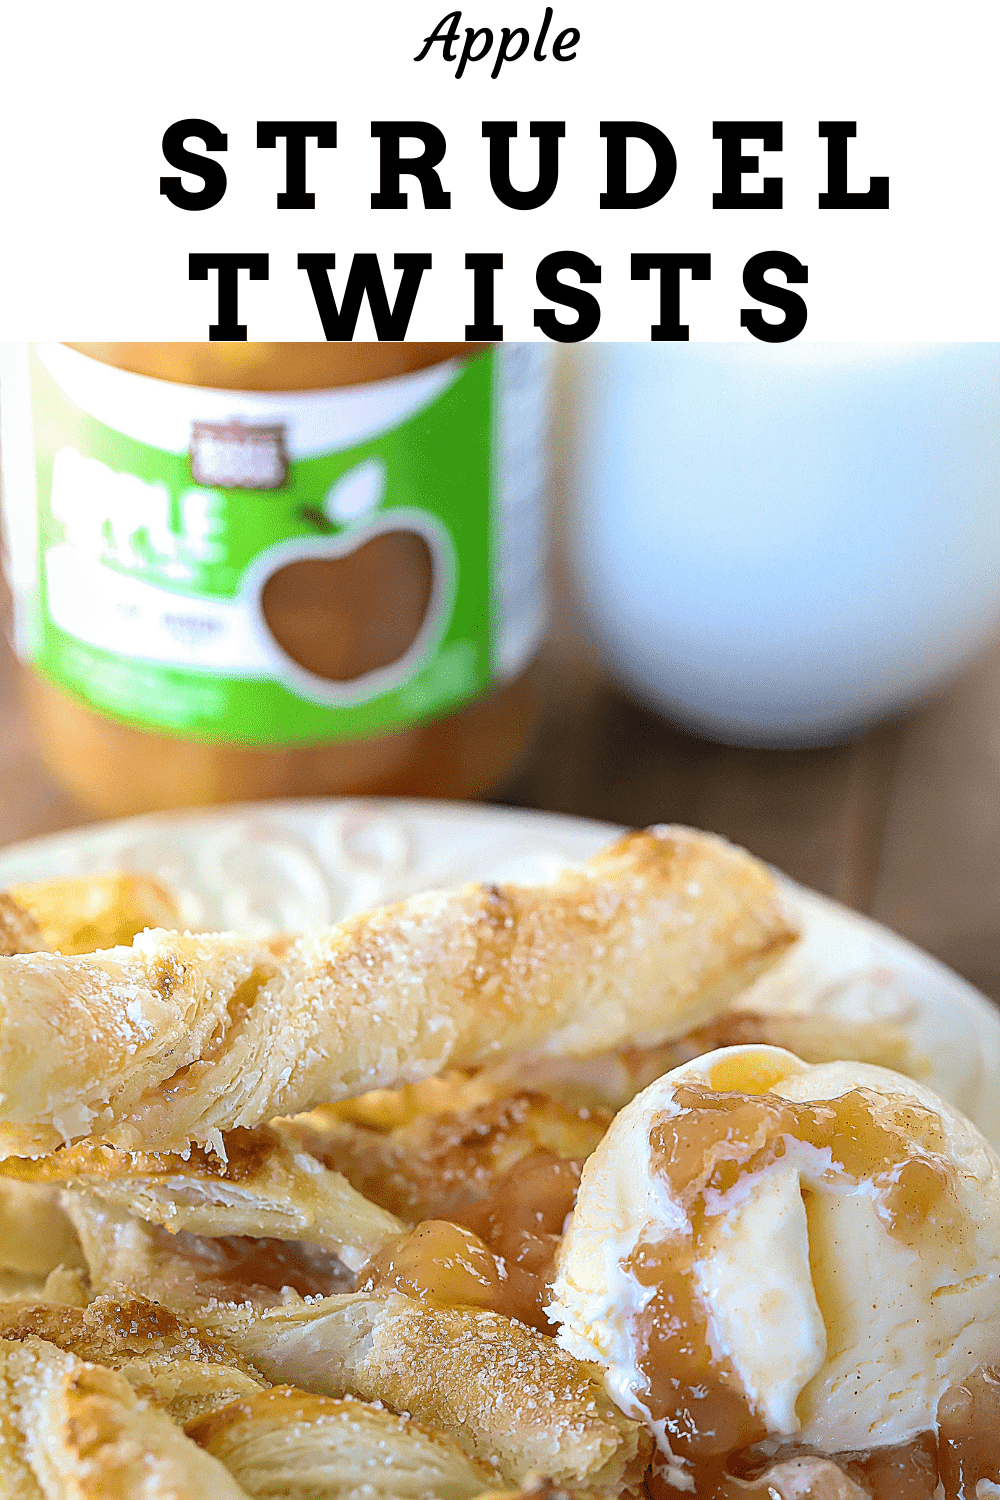 Who knew apple pie filling could help create such an amazing and fun dessert?! These Apple Strudel Twists are so easy to make. Puff Pastry dough is filled with a cream cheese and BakeGood™ Apple Pie Filling mix, then twisted and baked - heaven in a crunchy dessert breadstick. #ad @bakegood #bakegood #dessert #yummy via @jennikolaus